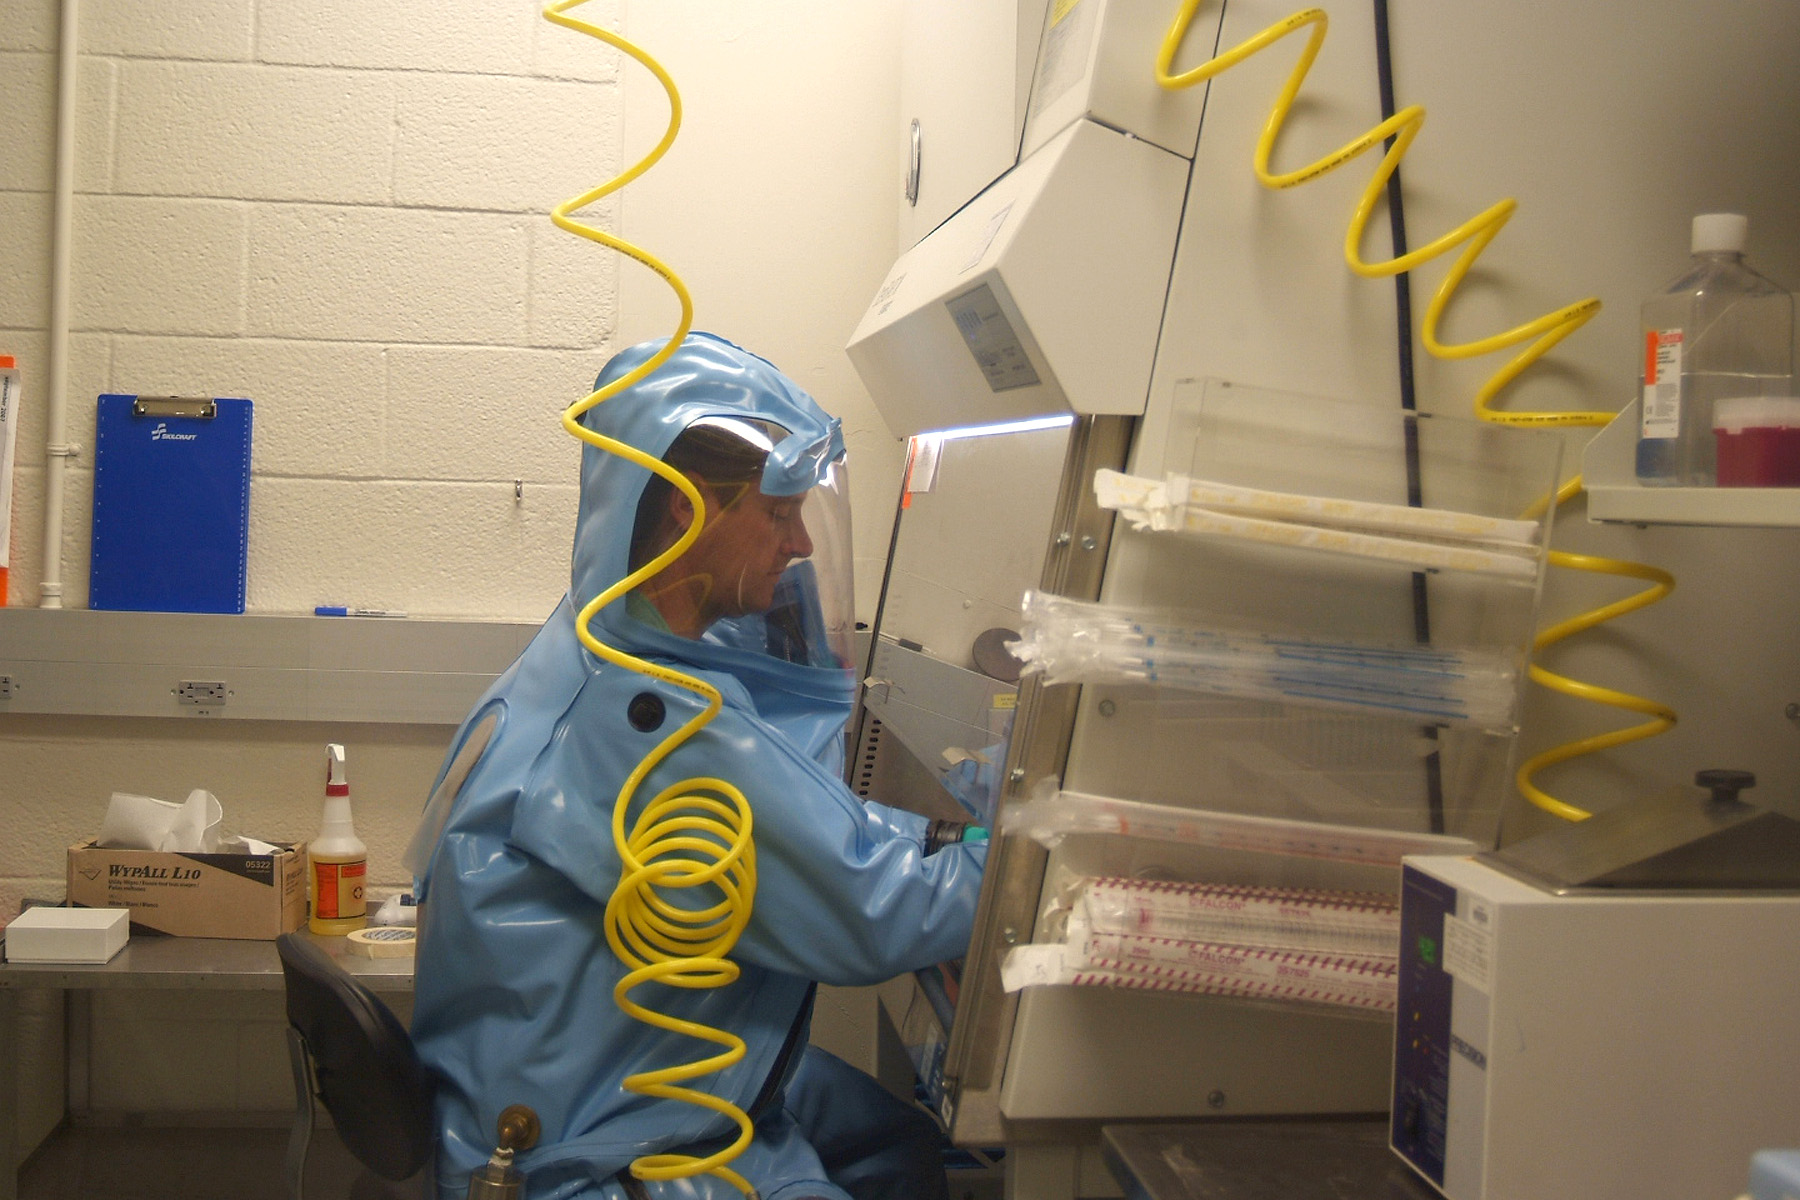 A man at work in a blue full body hazmat suit is surrounded by laboratory equipment